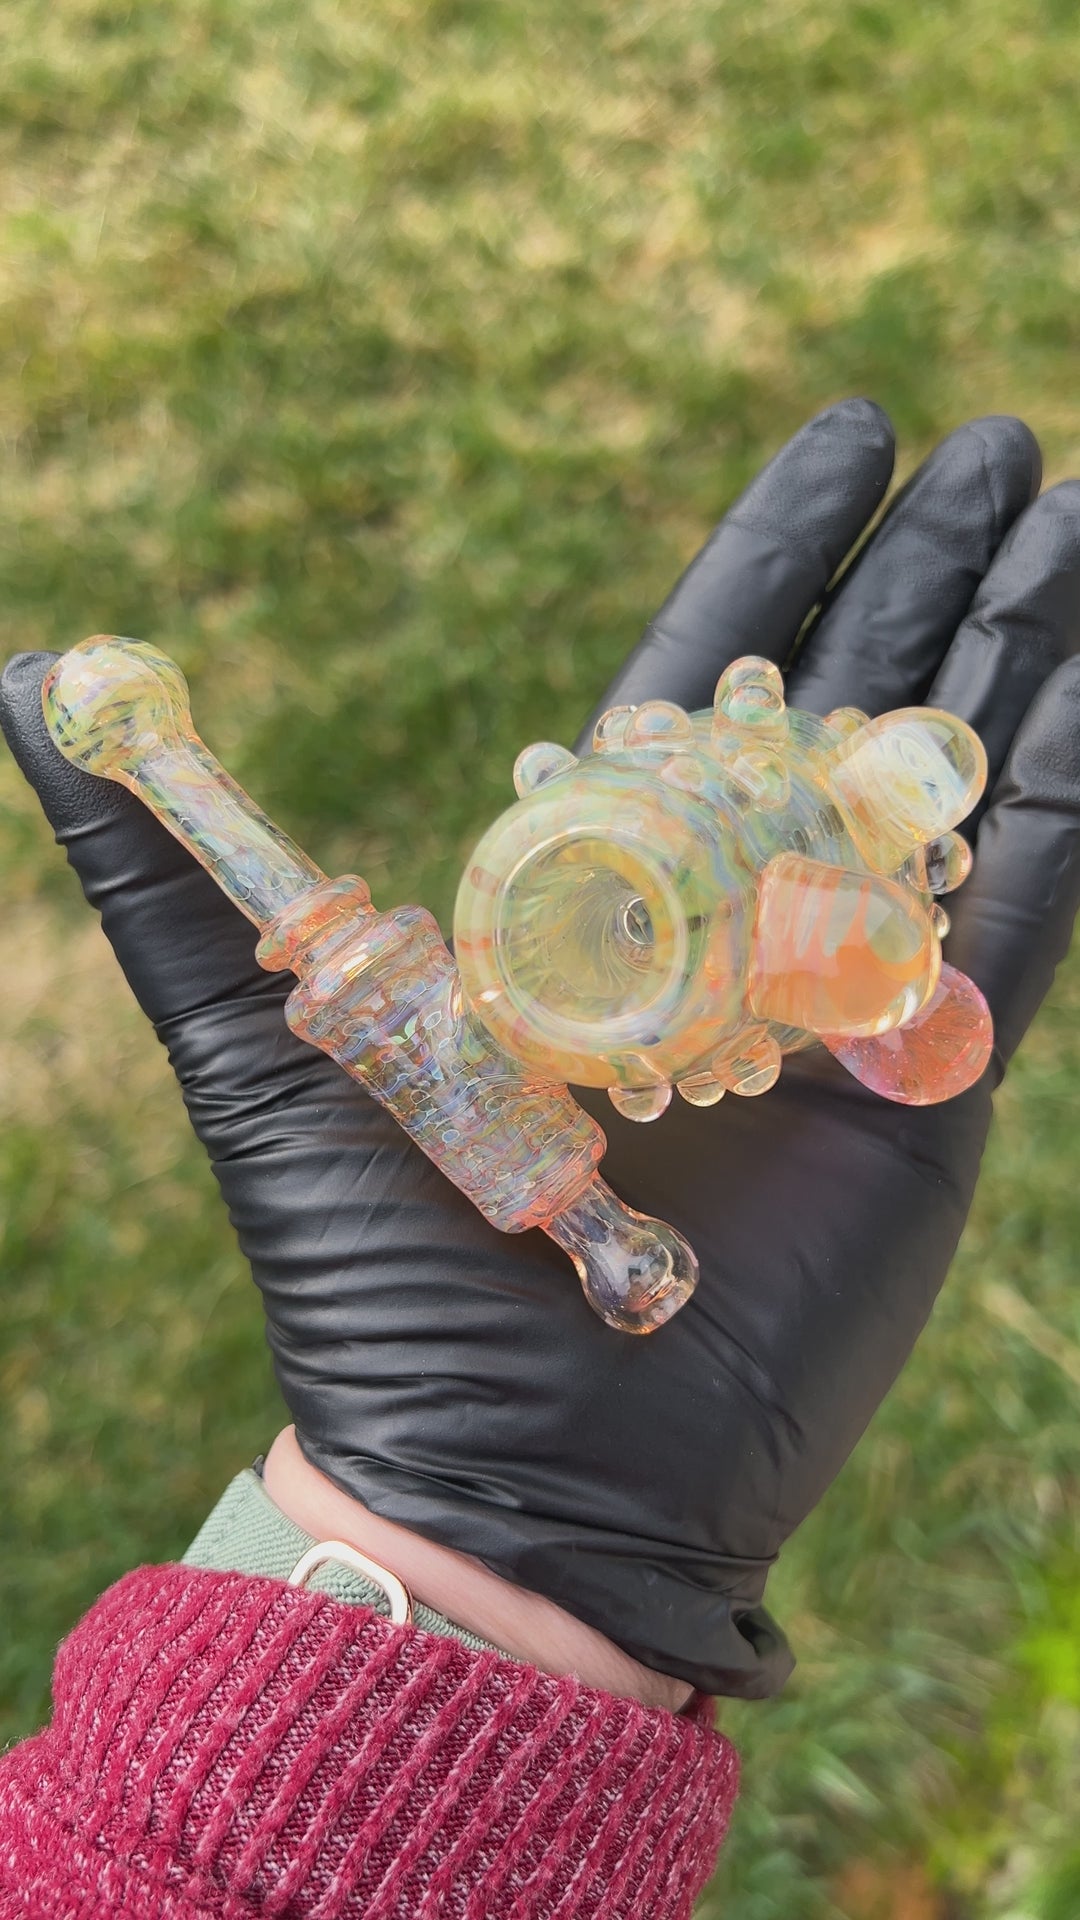 Gold Fumed Sidecar Pipe